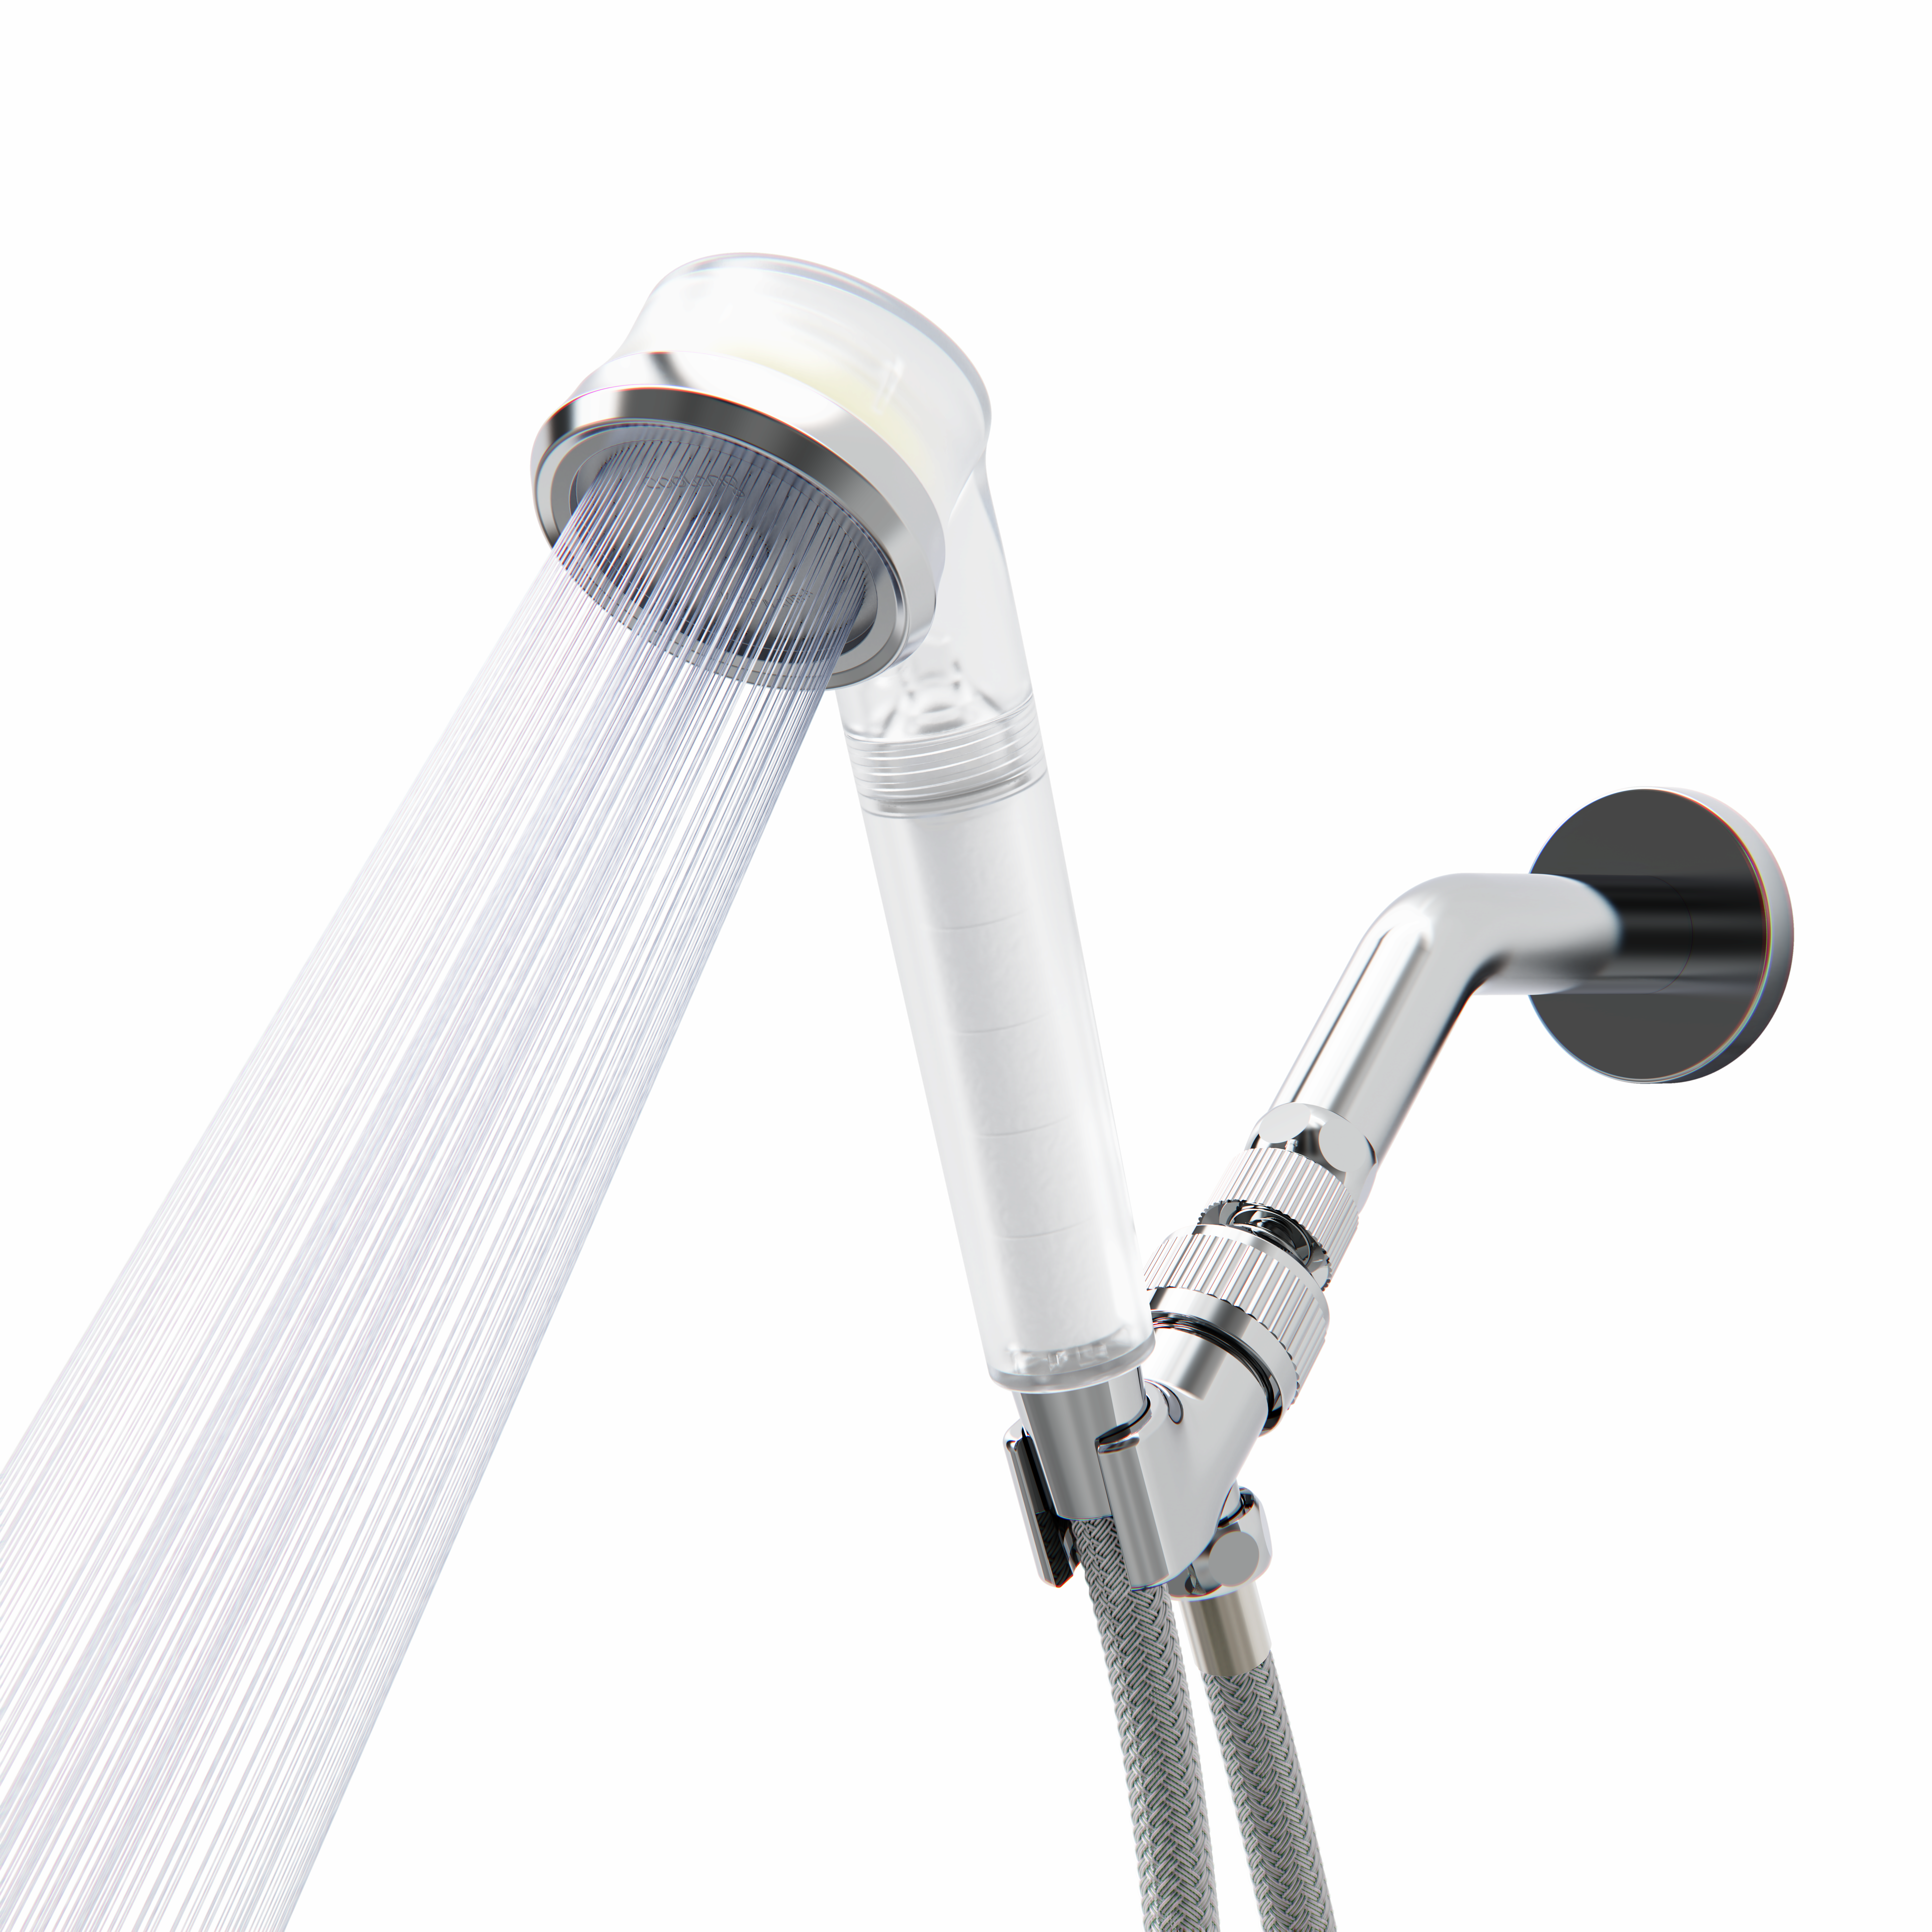 COOLANG Vita Dual Filtration System High Pressure Shower Head and Replaceable Vitamin C Filter